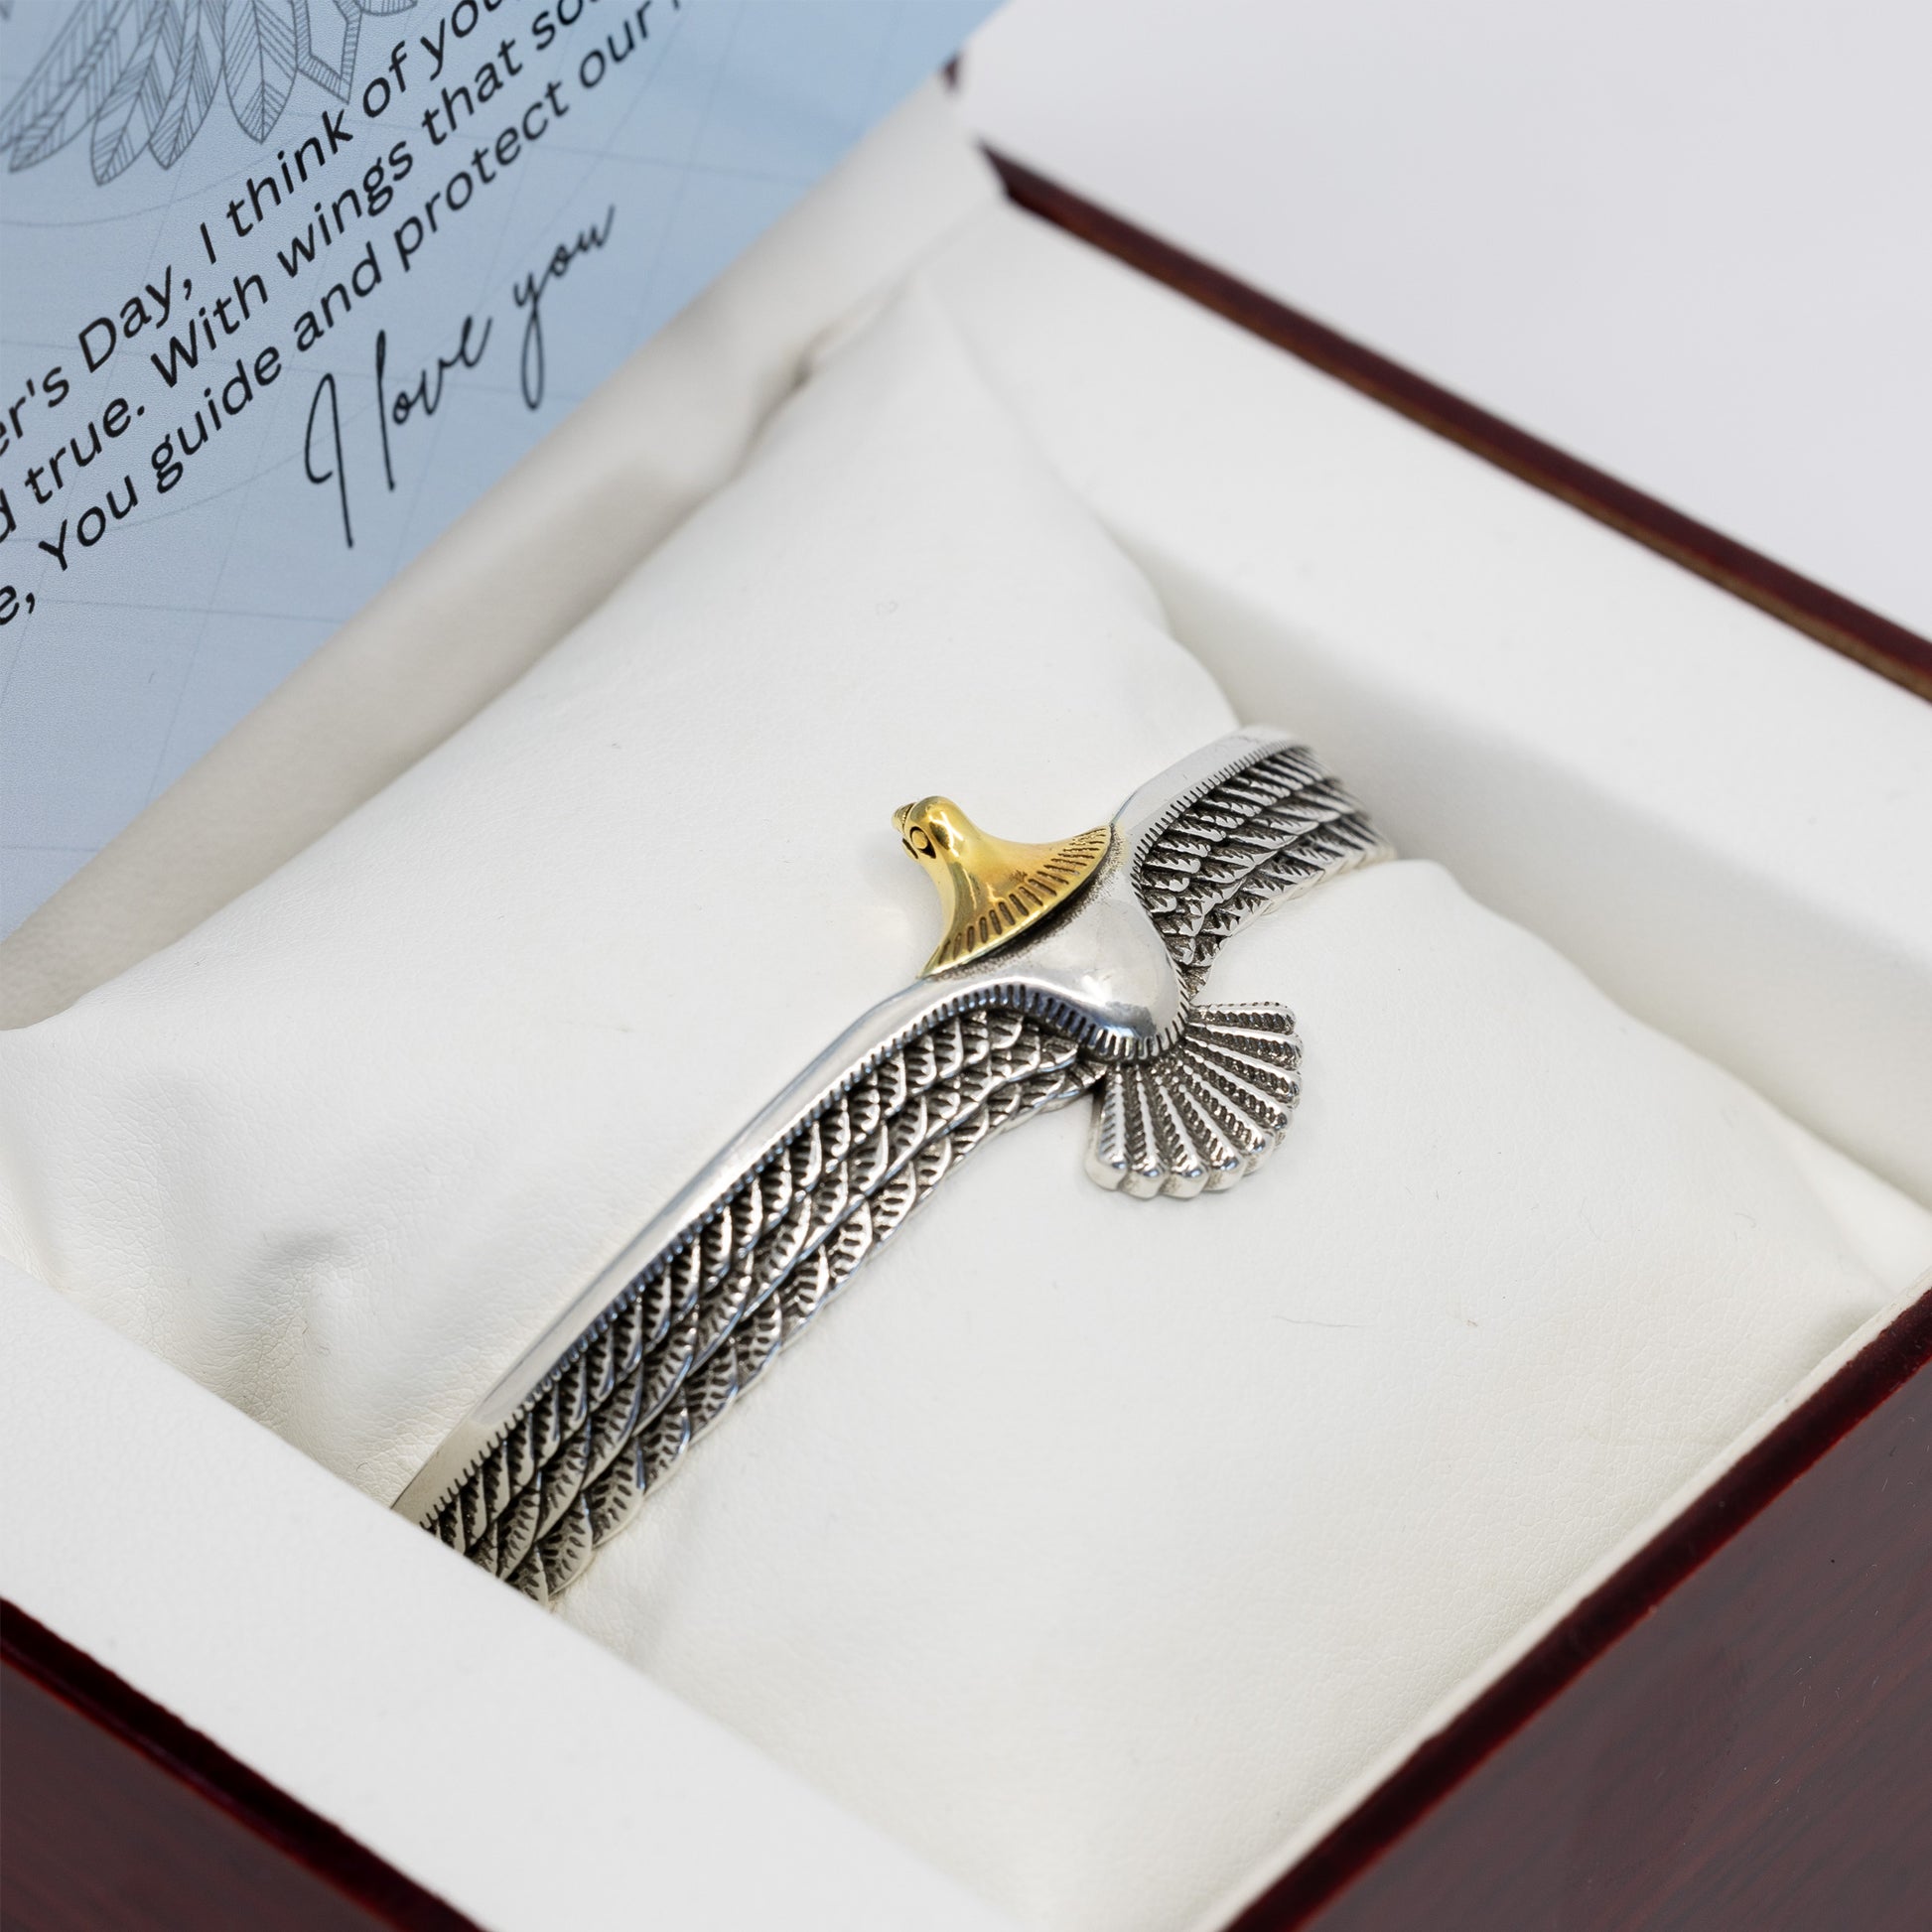 Gift For Dad - Silver Eagle Bangle - Fathers Day Gift - Personalised Message Card Luxury Gift Box